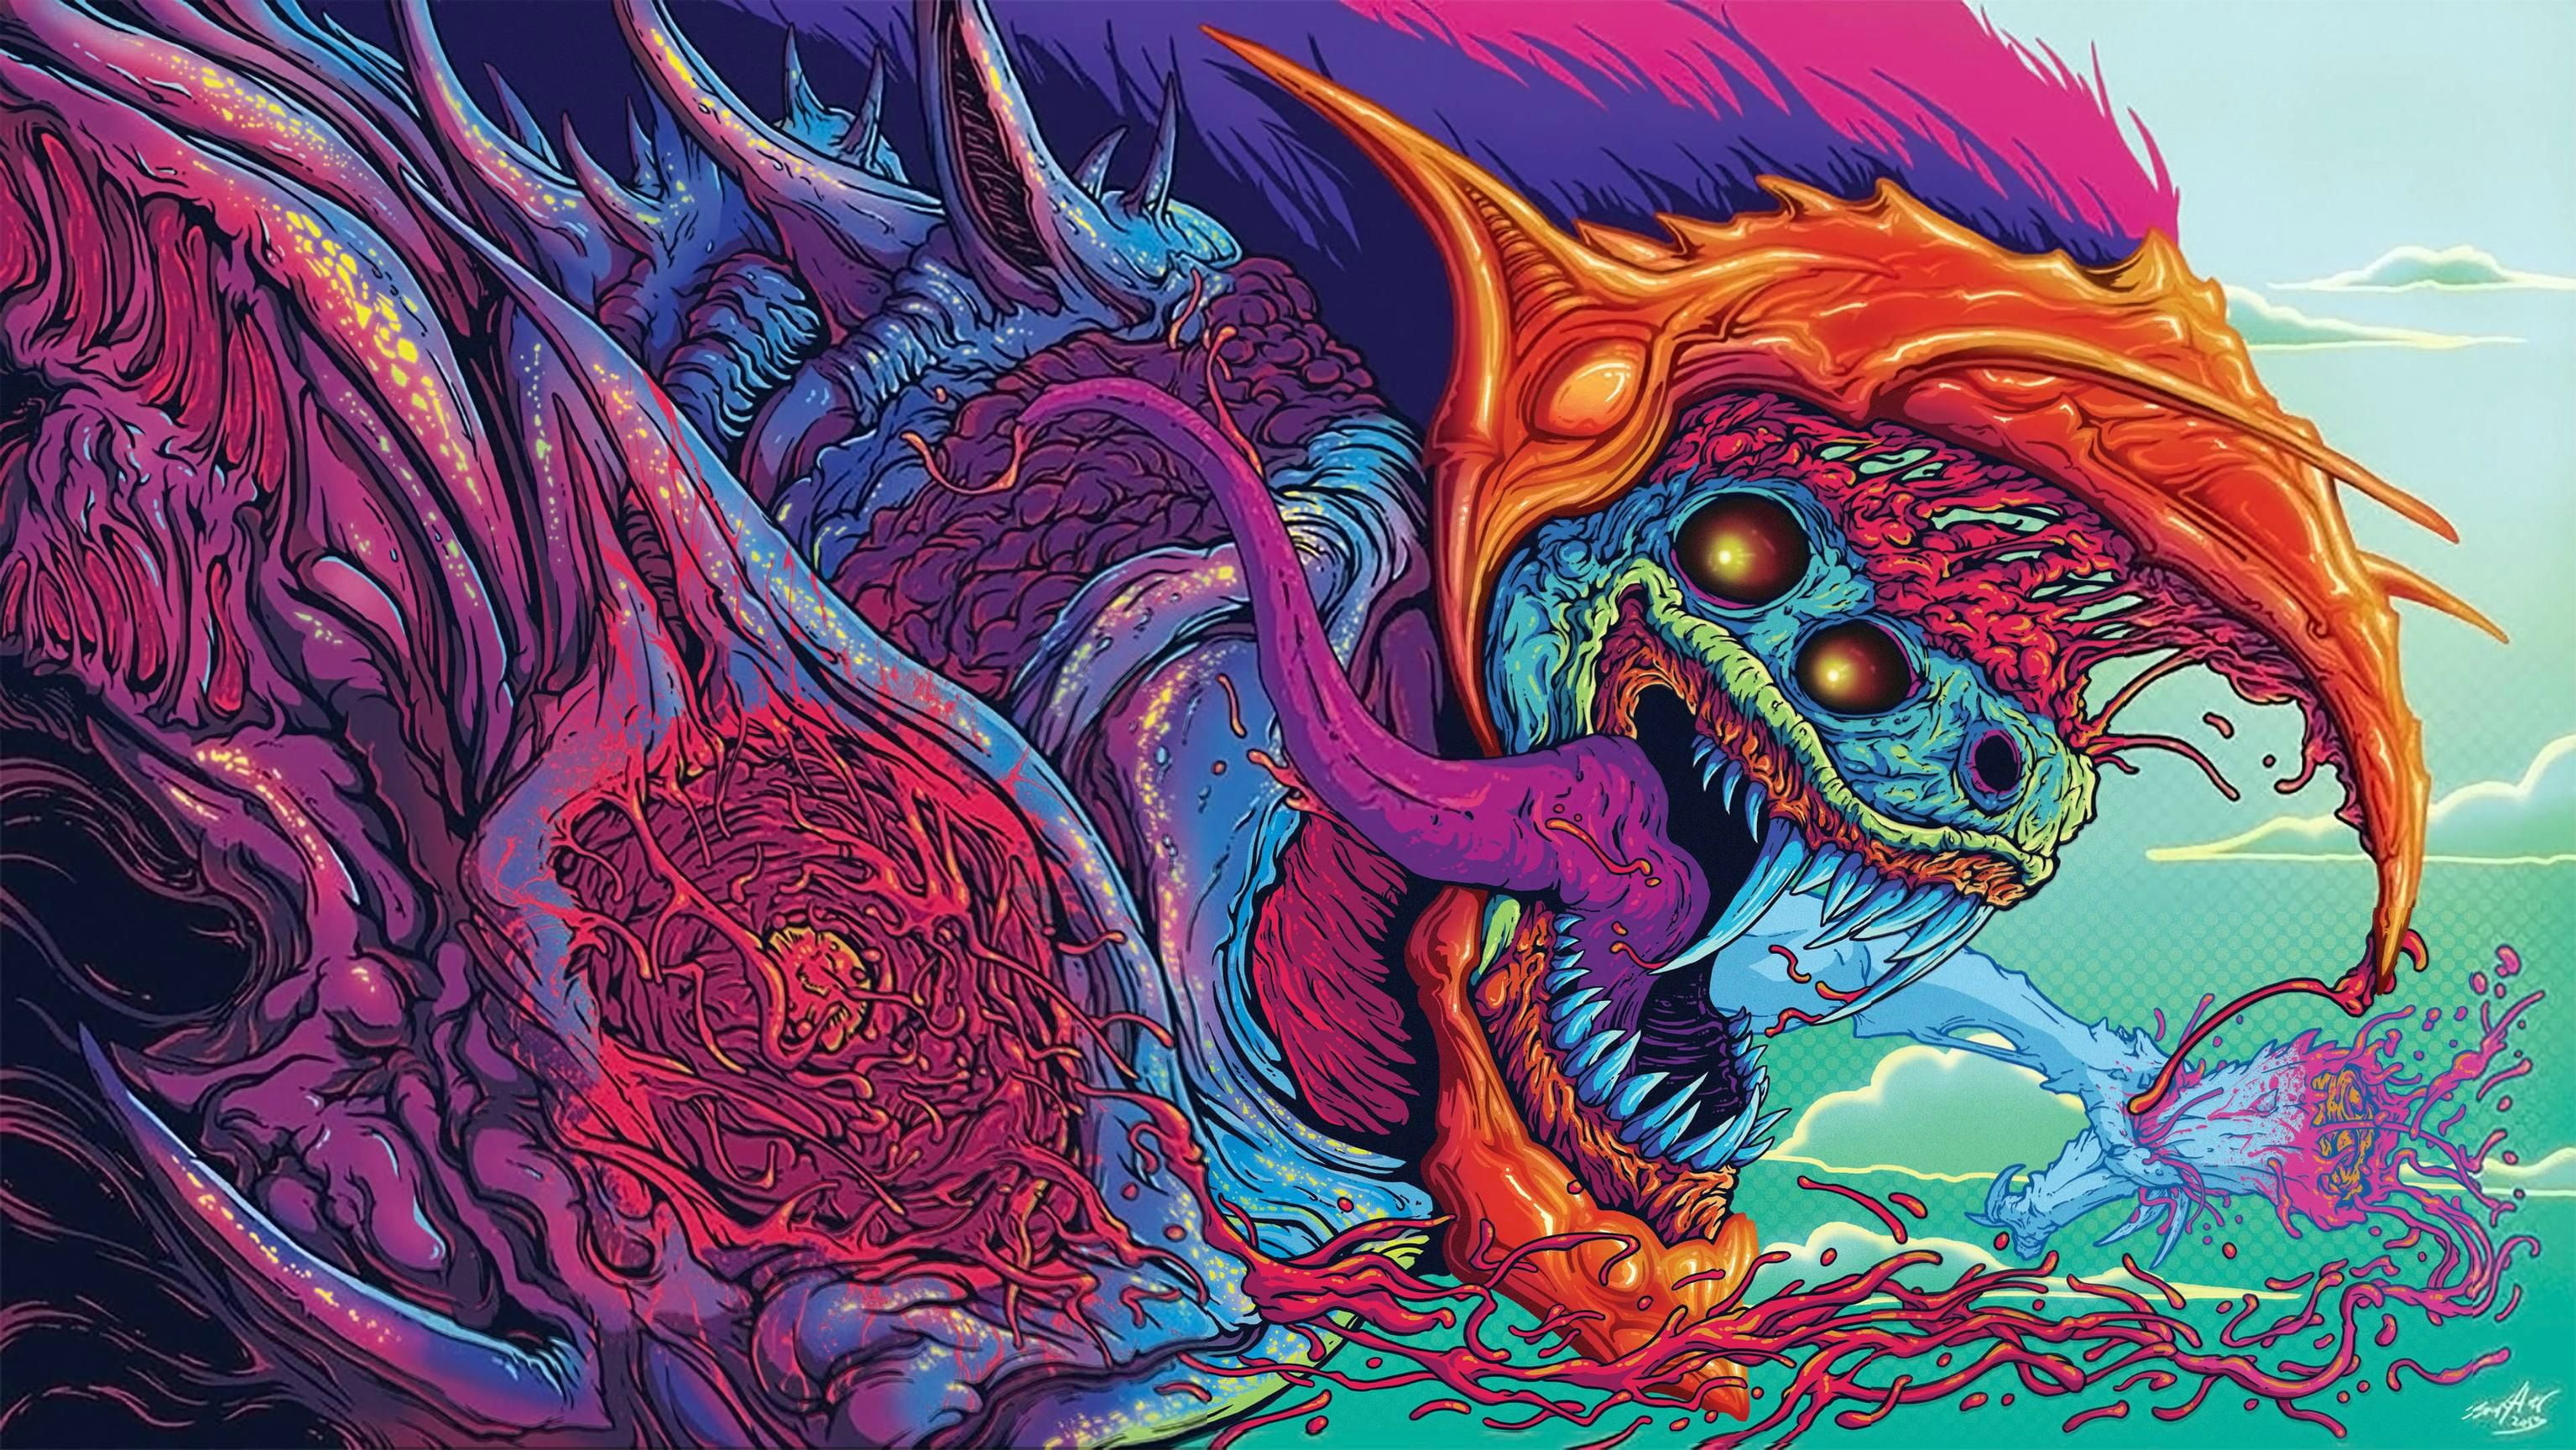 3070x1728 pink and blue bird monster illustration, psychedelic, abstract, creature,  trippy HD wallpaper